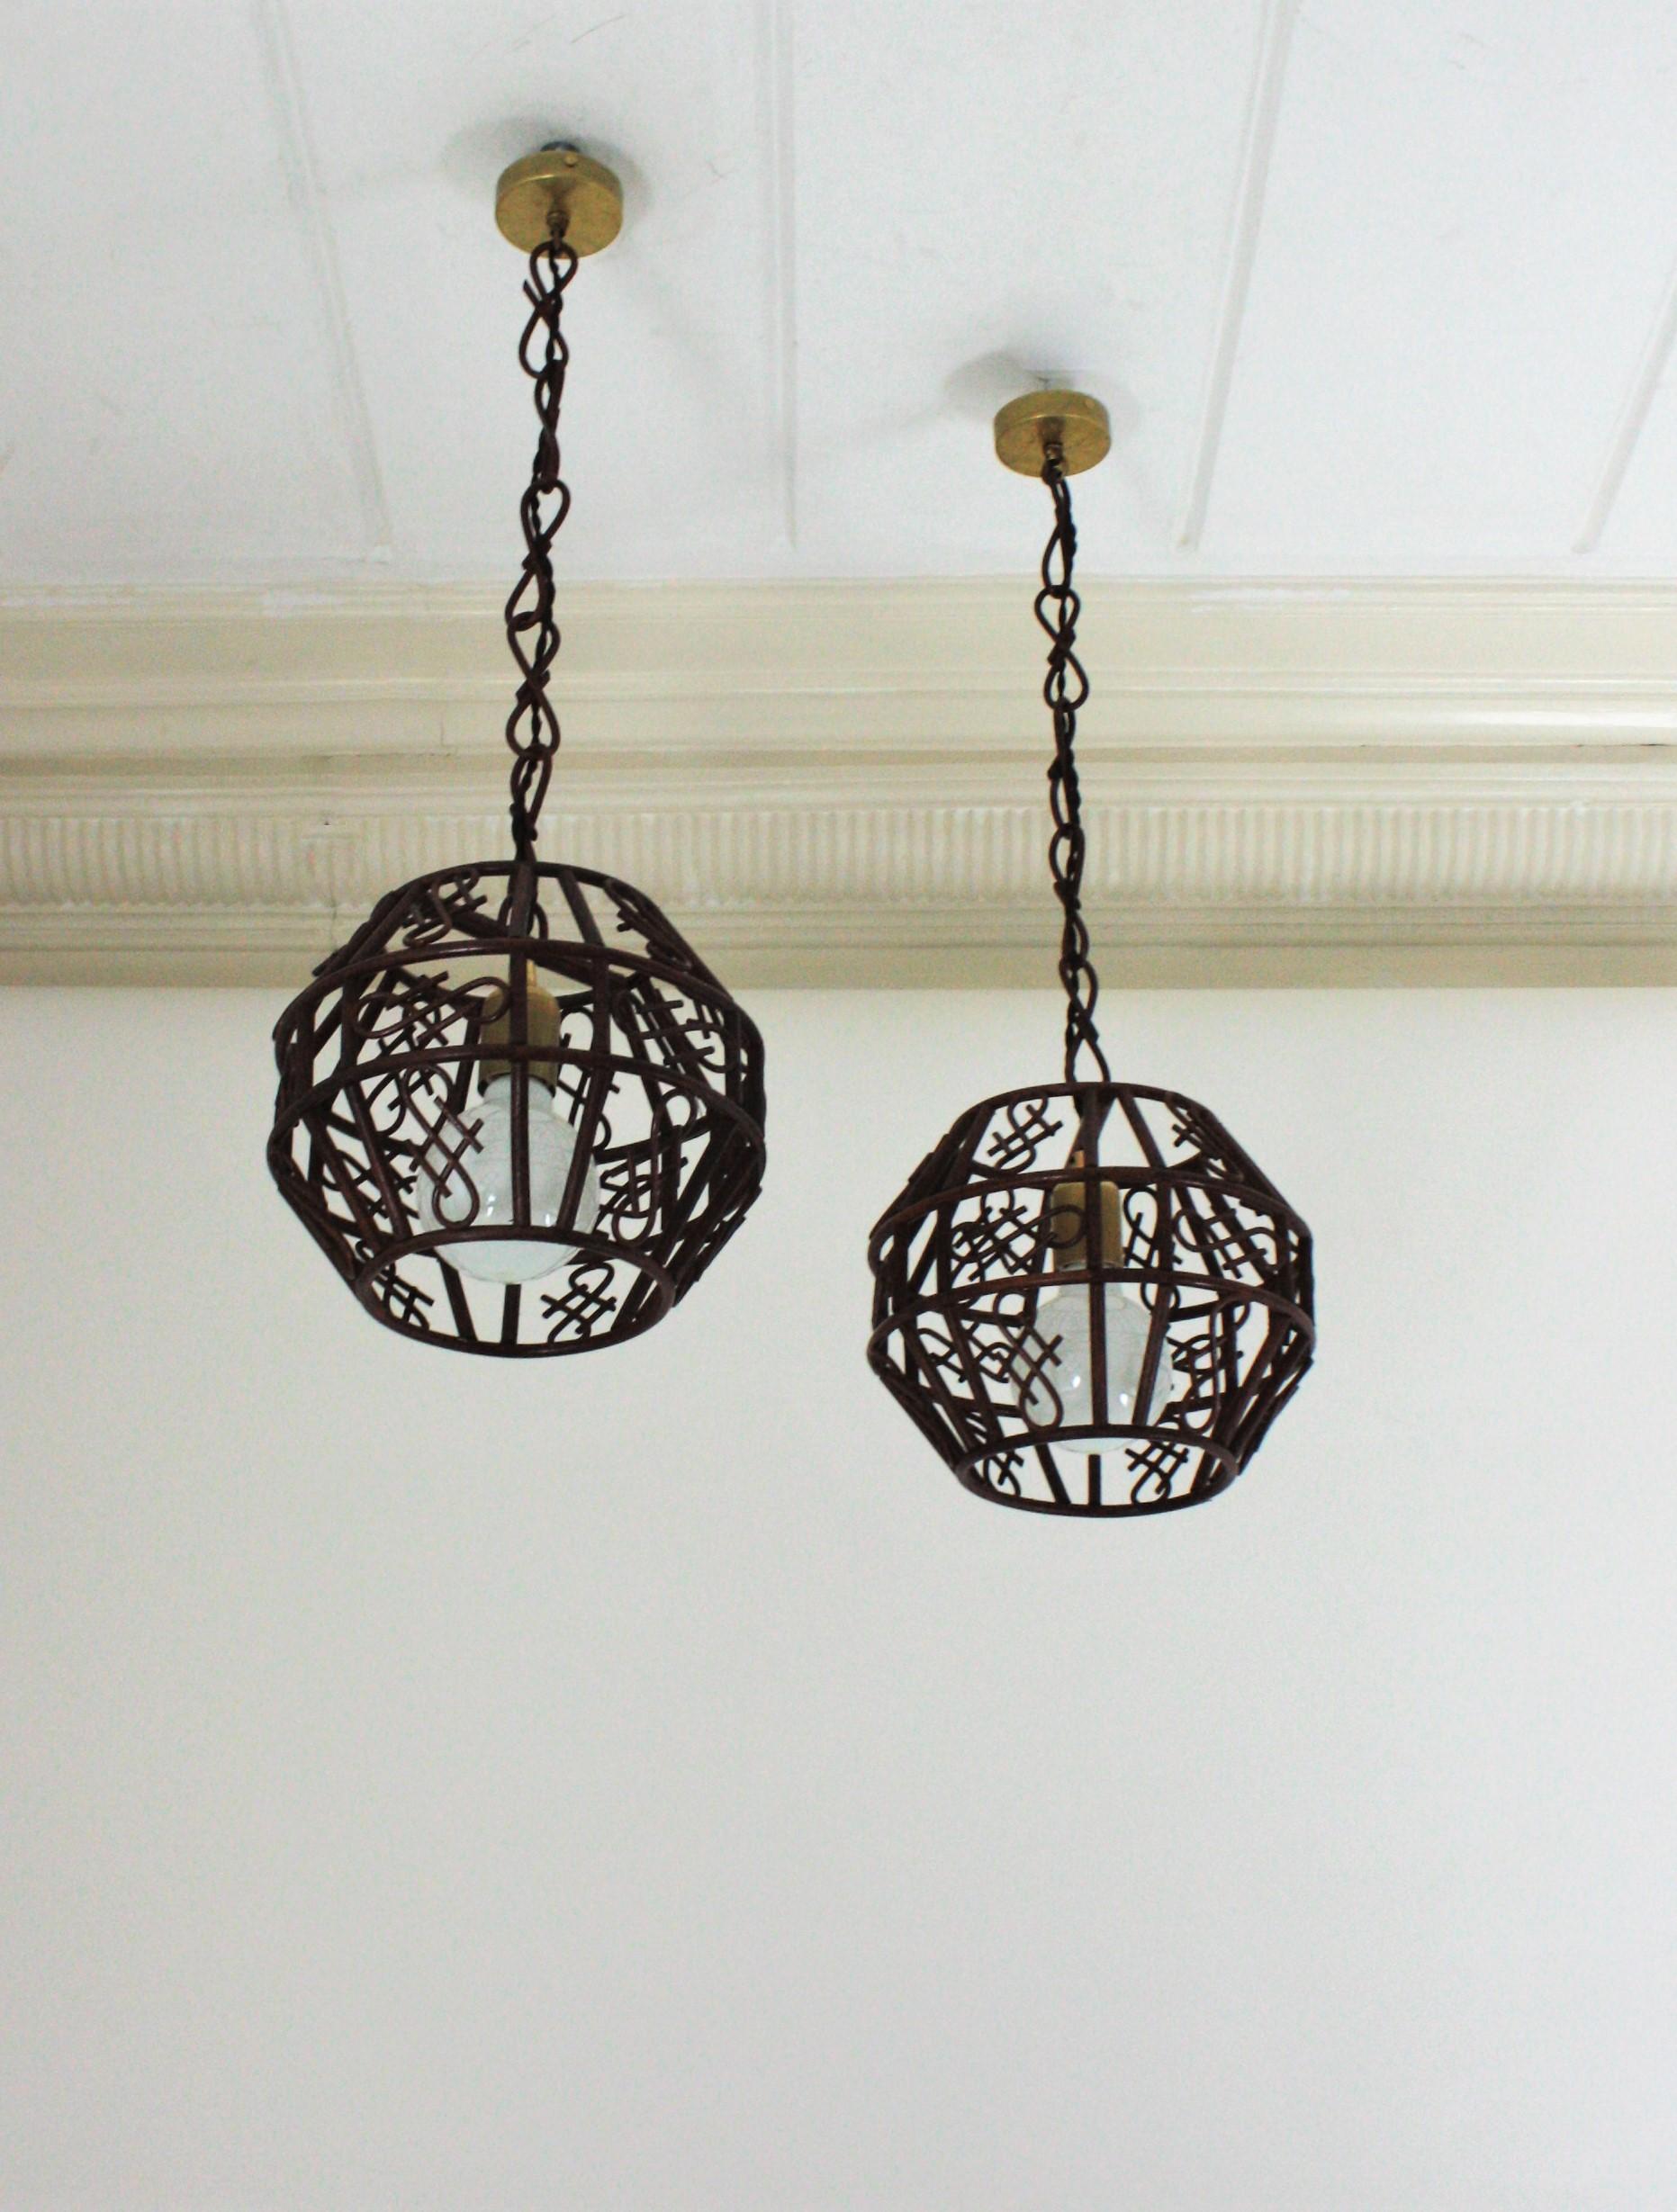 Pair of French Rattan Pendant Lights or Lanterns, 1960s For Sale 1